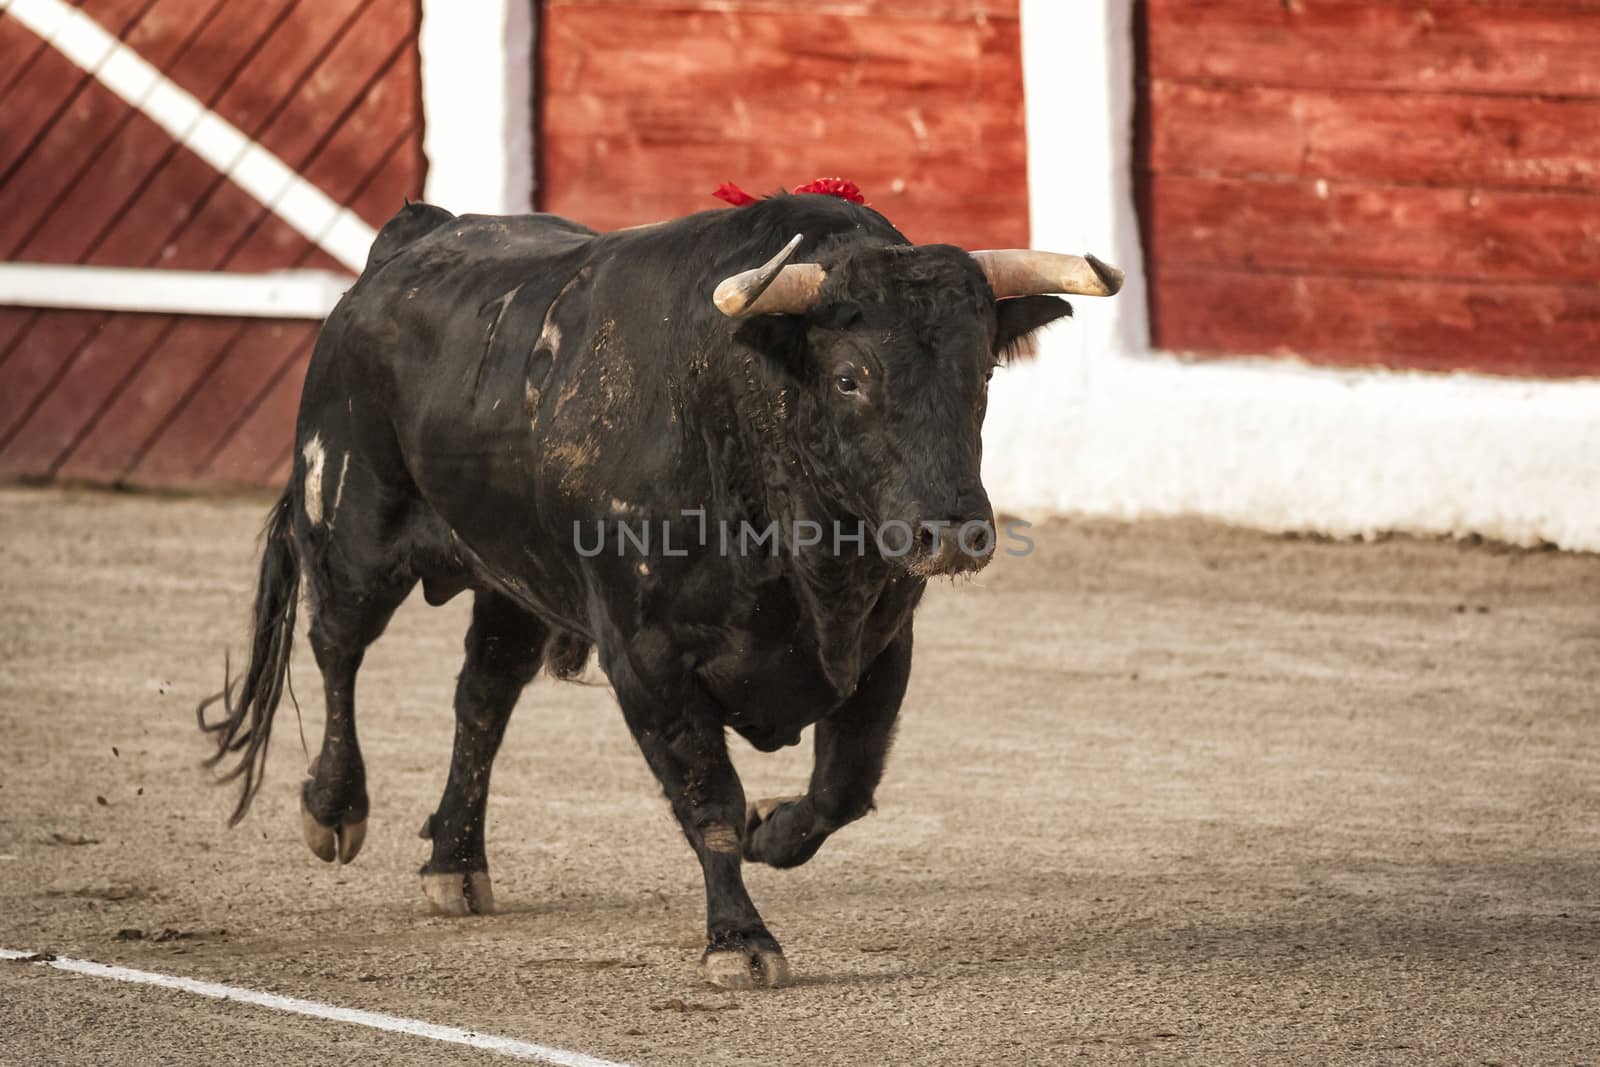 Linares, Jaen province, SPAIN - 28 august 2011: Bull about 650 Kg galloping in the sand right when I just got out of the bullpen, in the Linares bullring or also called arena of Santa Margarita, Linares, Jaen province, Andalusia, Spain